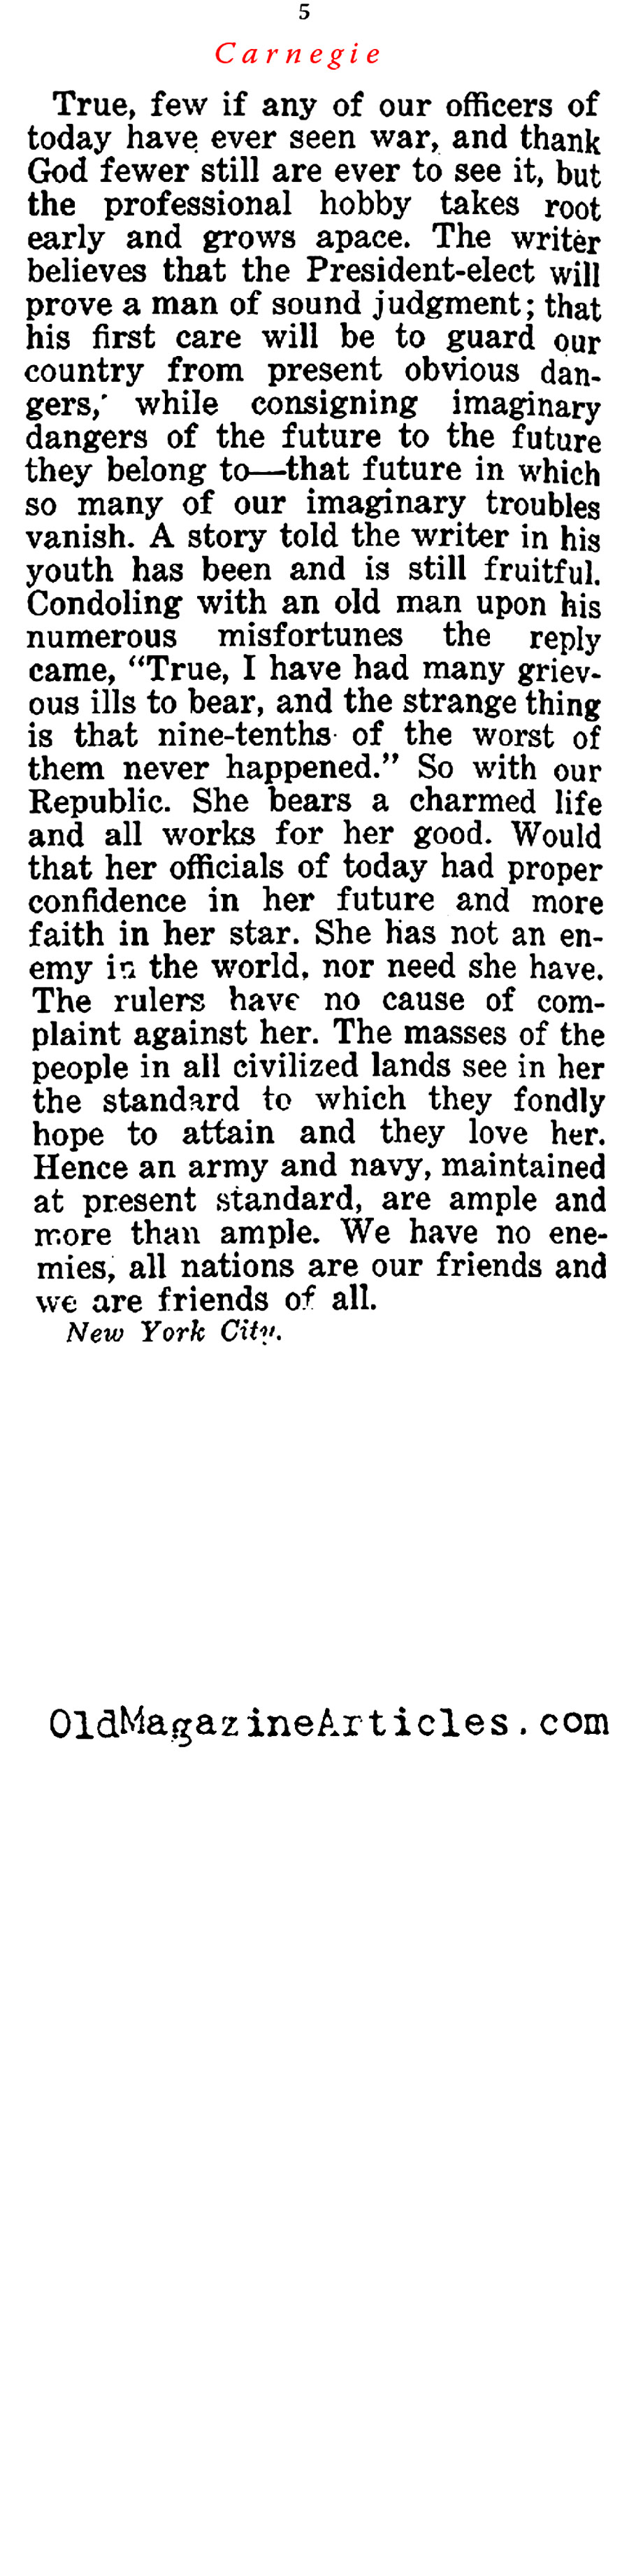 ''The Baseless Fear of War'' by Andrew Carnegie (The Independent, 1913)